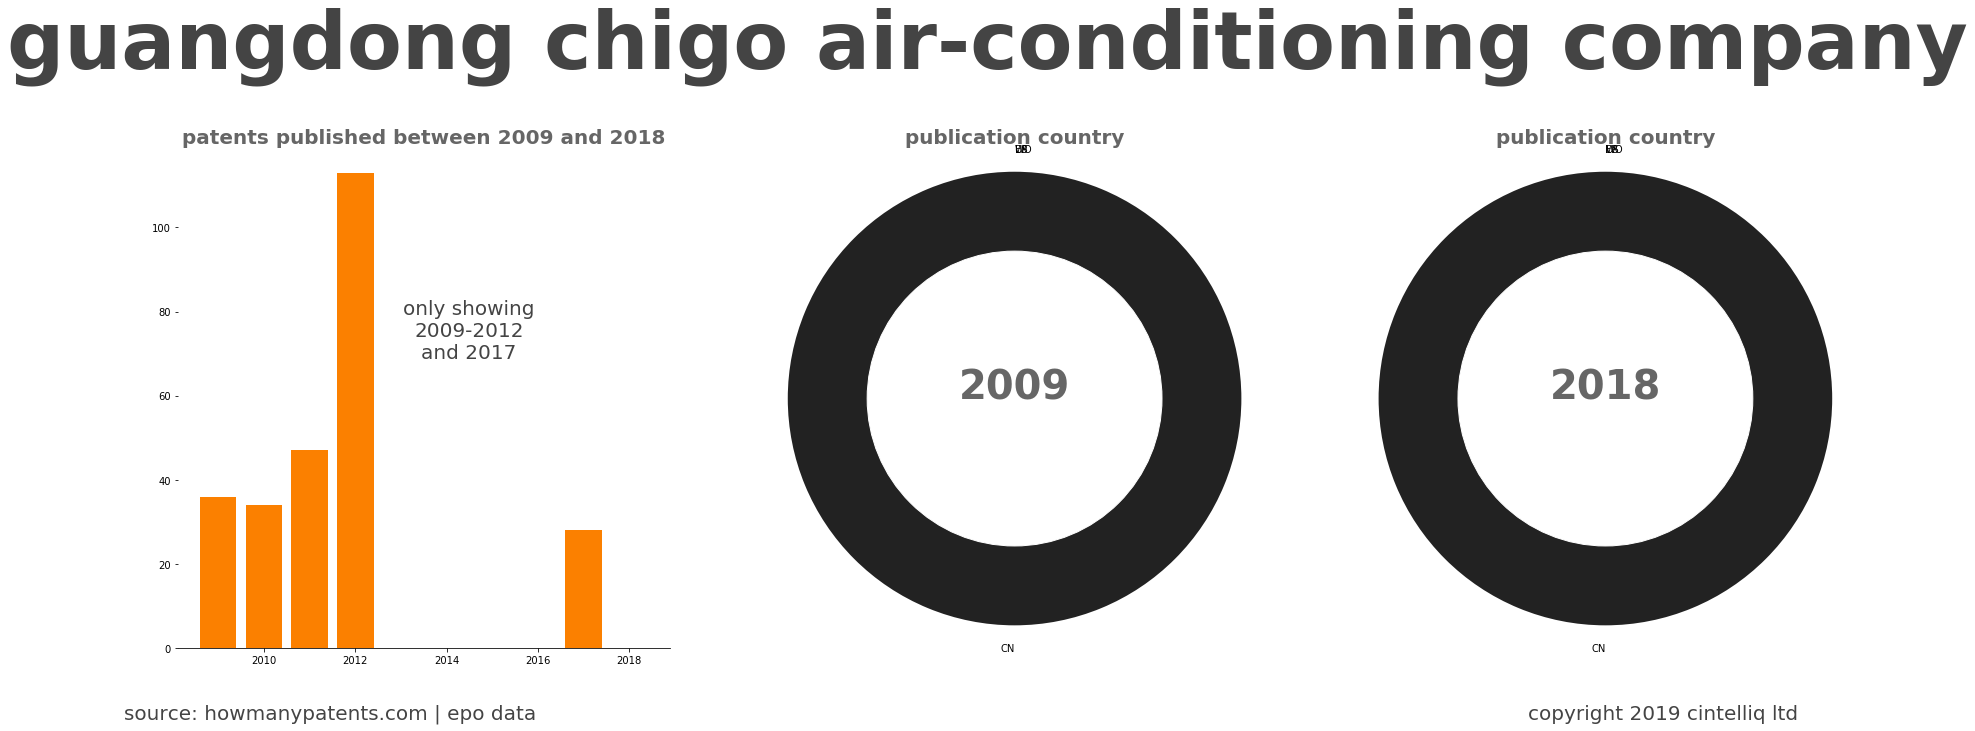 summary of patents for Guangdong Chigo Air-Conditioning Company